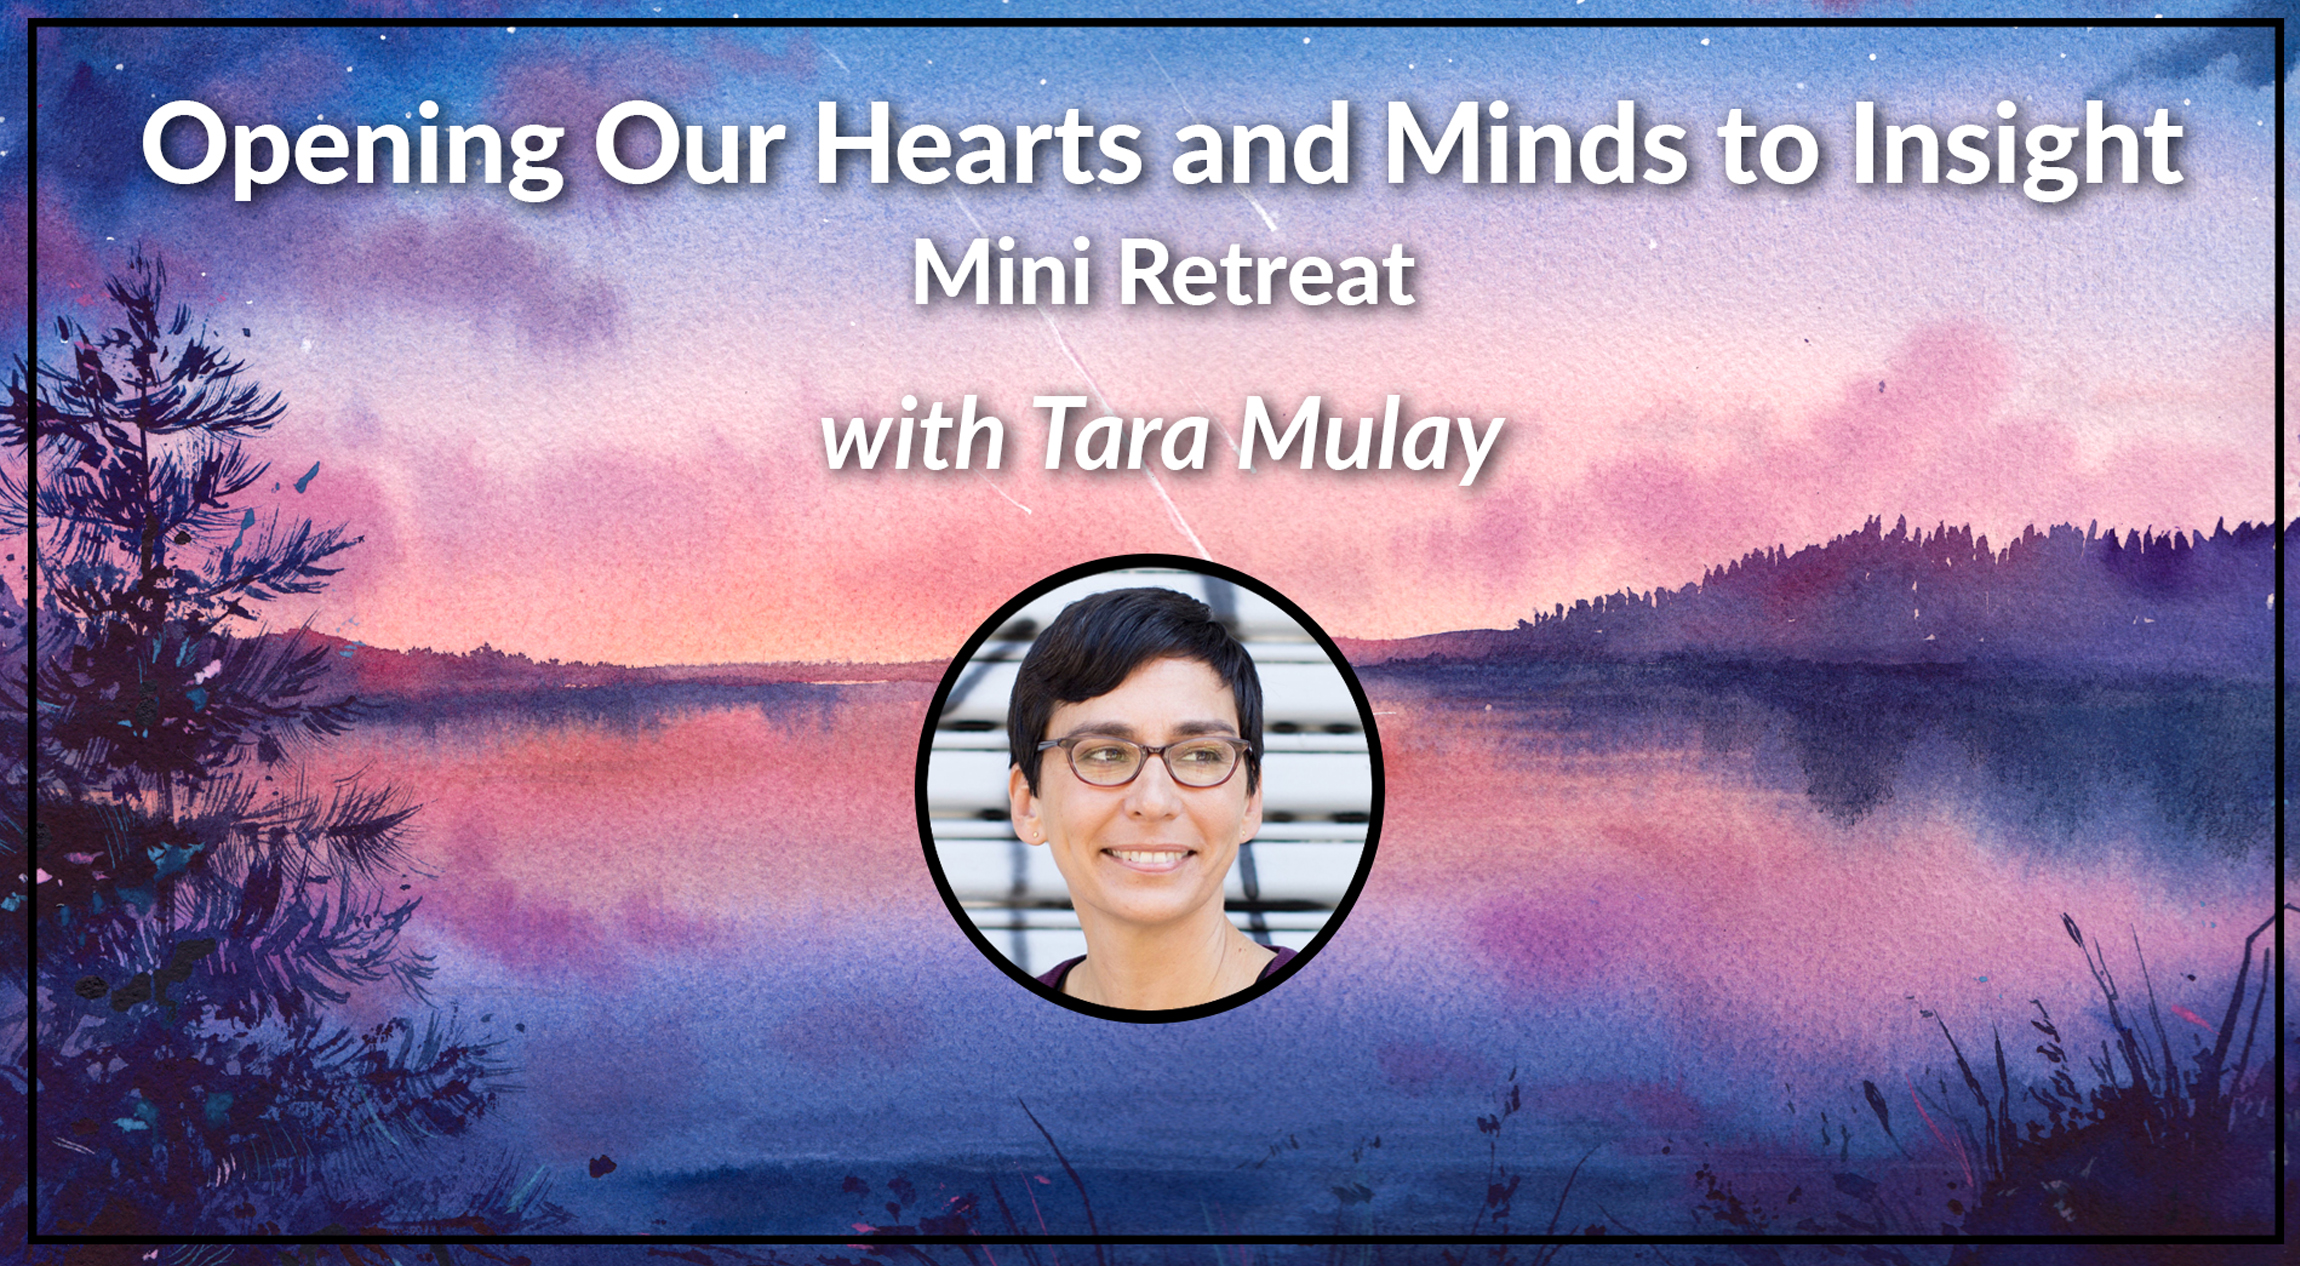 Opening Our Hearts and Minds to Insight with Tara Mulay